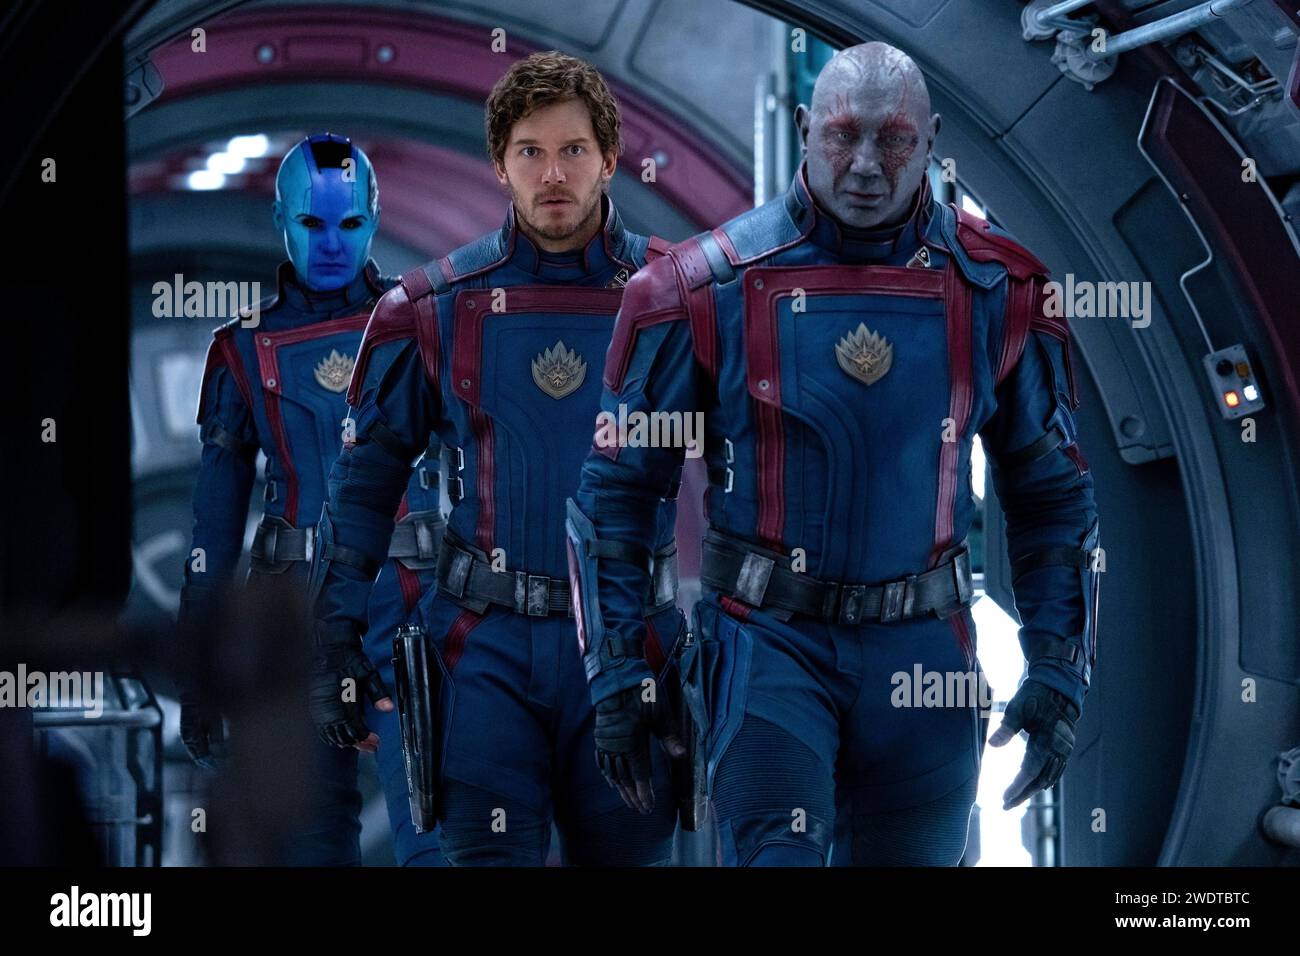 Guardians of the Galaxy Vol. 3 (2023) directed by James Gunn and starring Chris Pratt, Chukwudi Iwuji and Bradley Cooper. Still reeling from the loss of Gamora, Peter Quill rallies his team to defend the universe and one of their own - a mission that could mean the end of the Guardians if not successful. Publicity photograph ***EDITORIAL USE ONLY***. Credit: BFA / Jessica Miglio / Marvel Studios Stock Photo